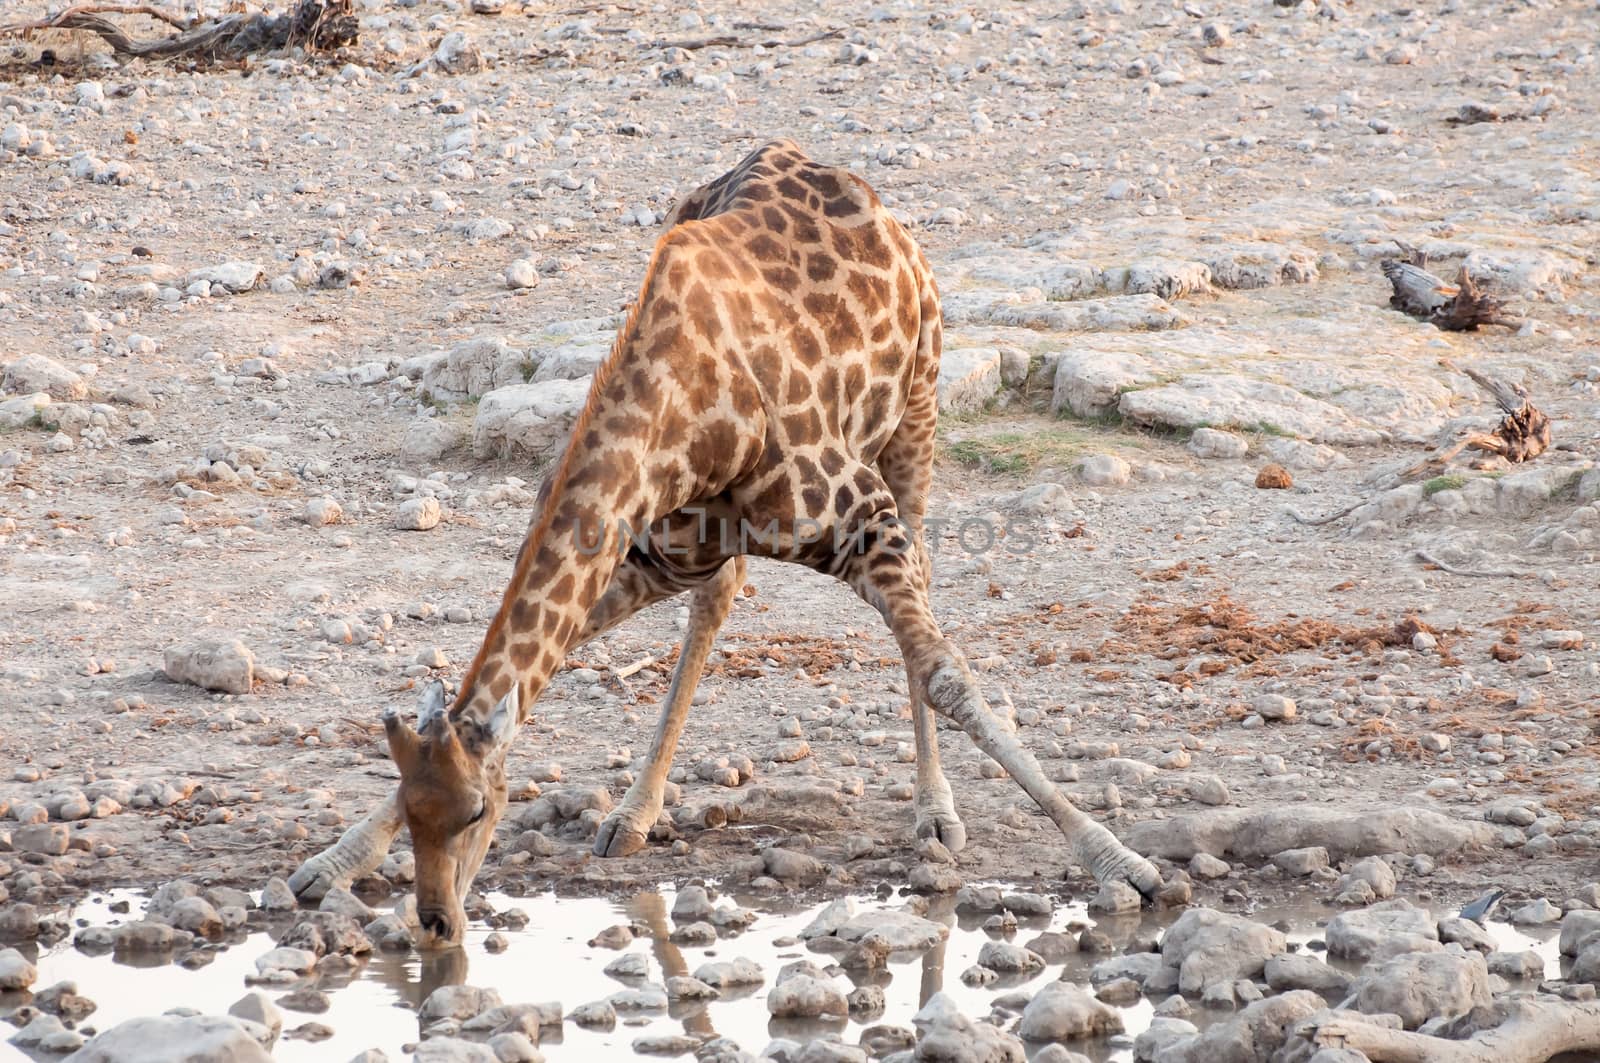 A giraffe at a waterhole in Namibia Etosha National Park has to stretch his long legs to reach the water with his long neck.